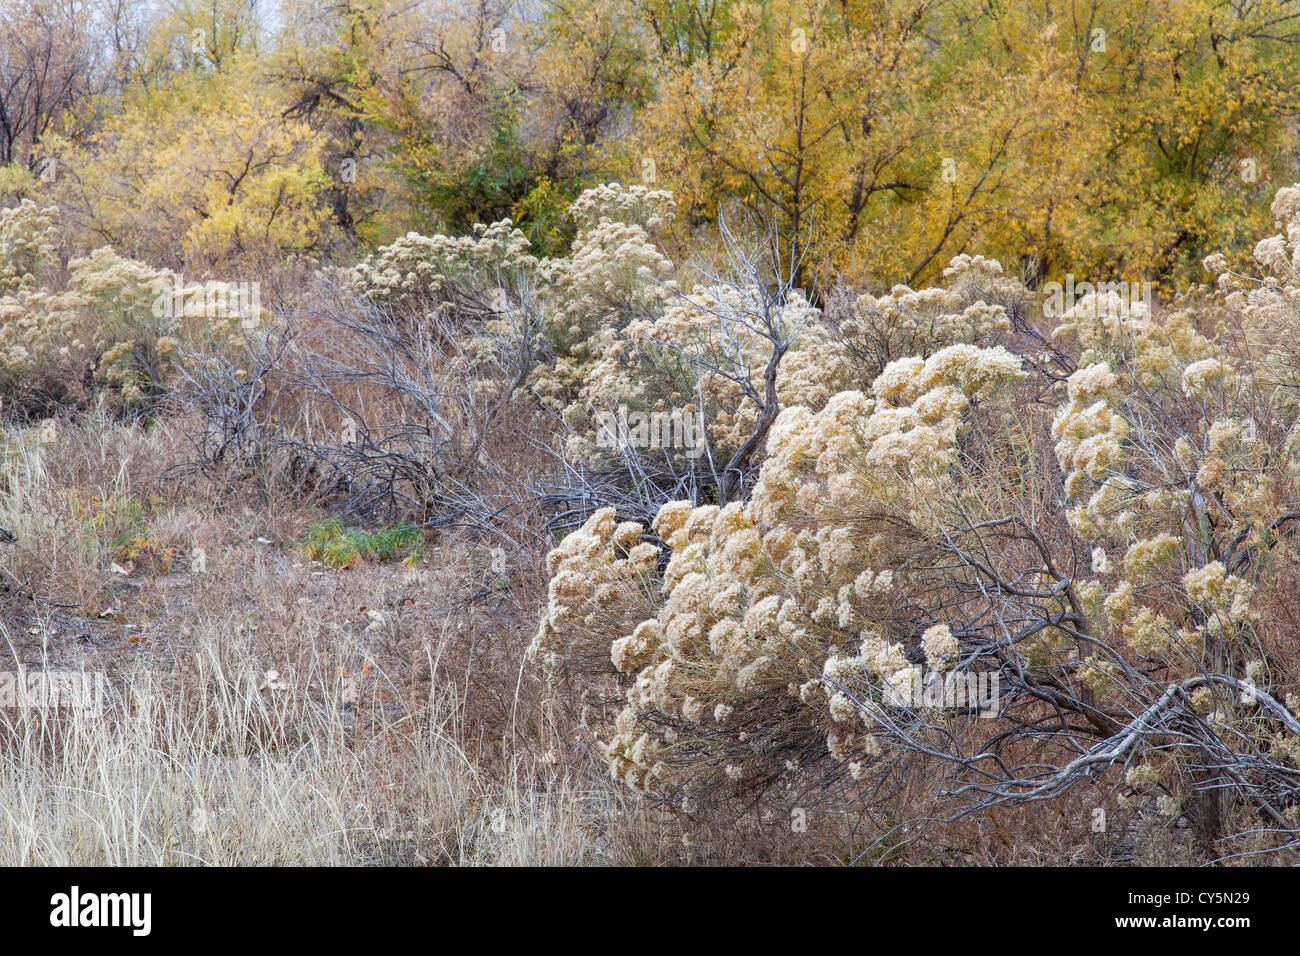 rabbitbrush, dry grass and cottonwood along Cache la Poudre River in Fort Collins, Colorado, late fall scenery Stock Photo